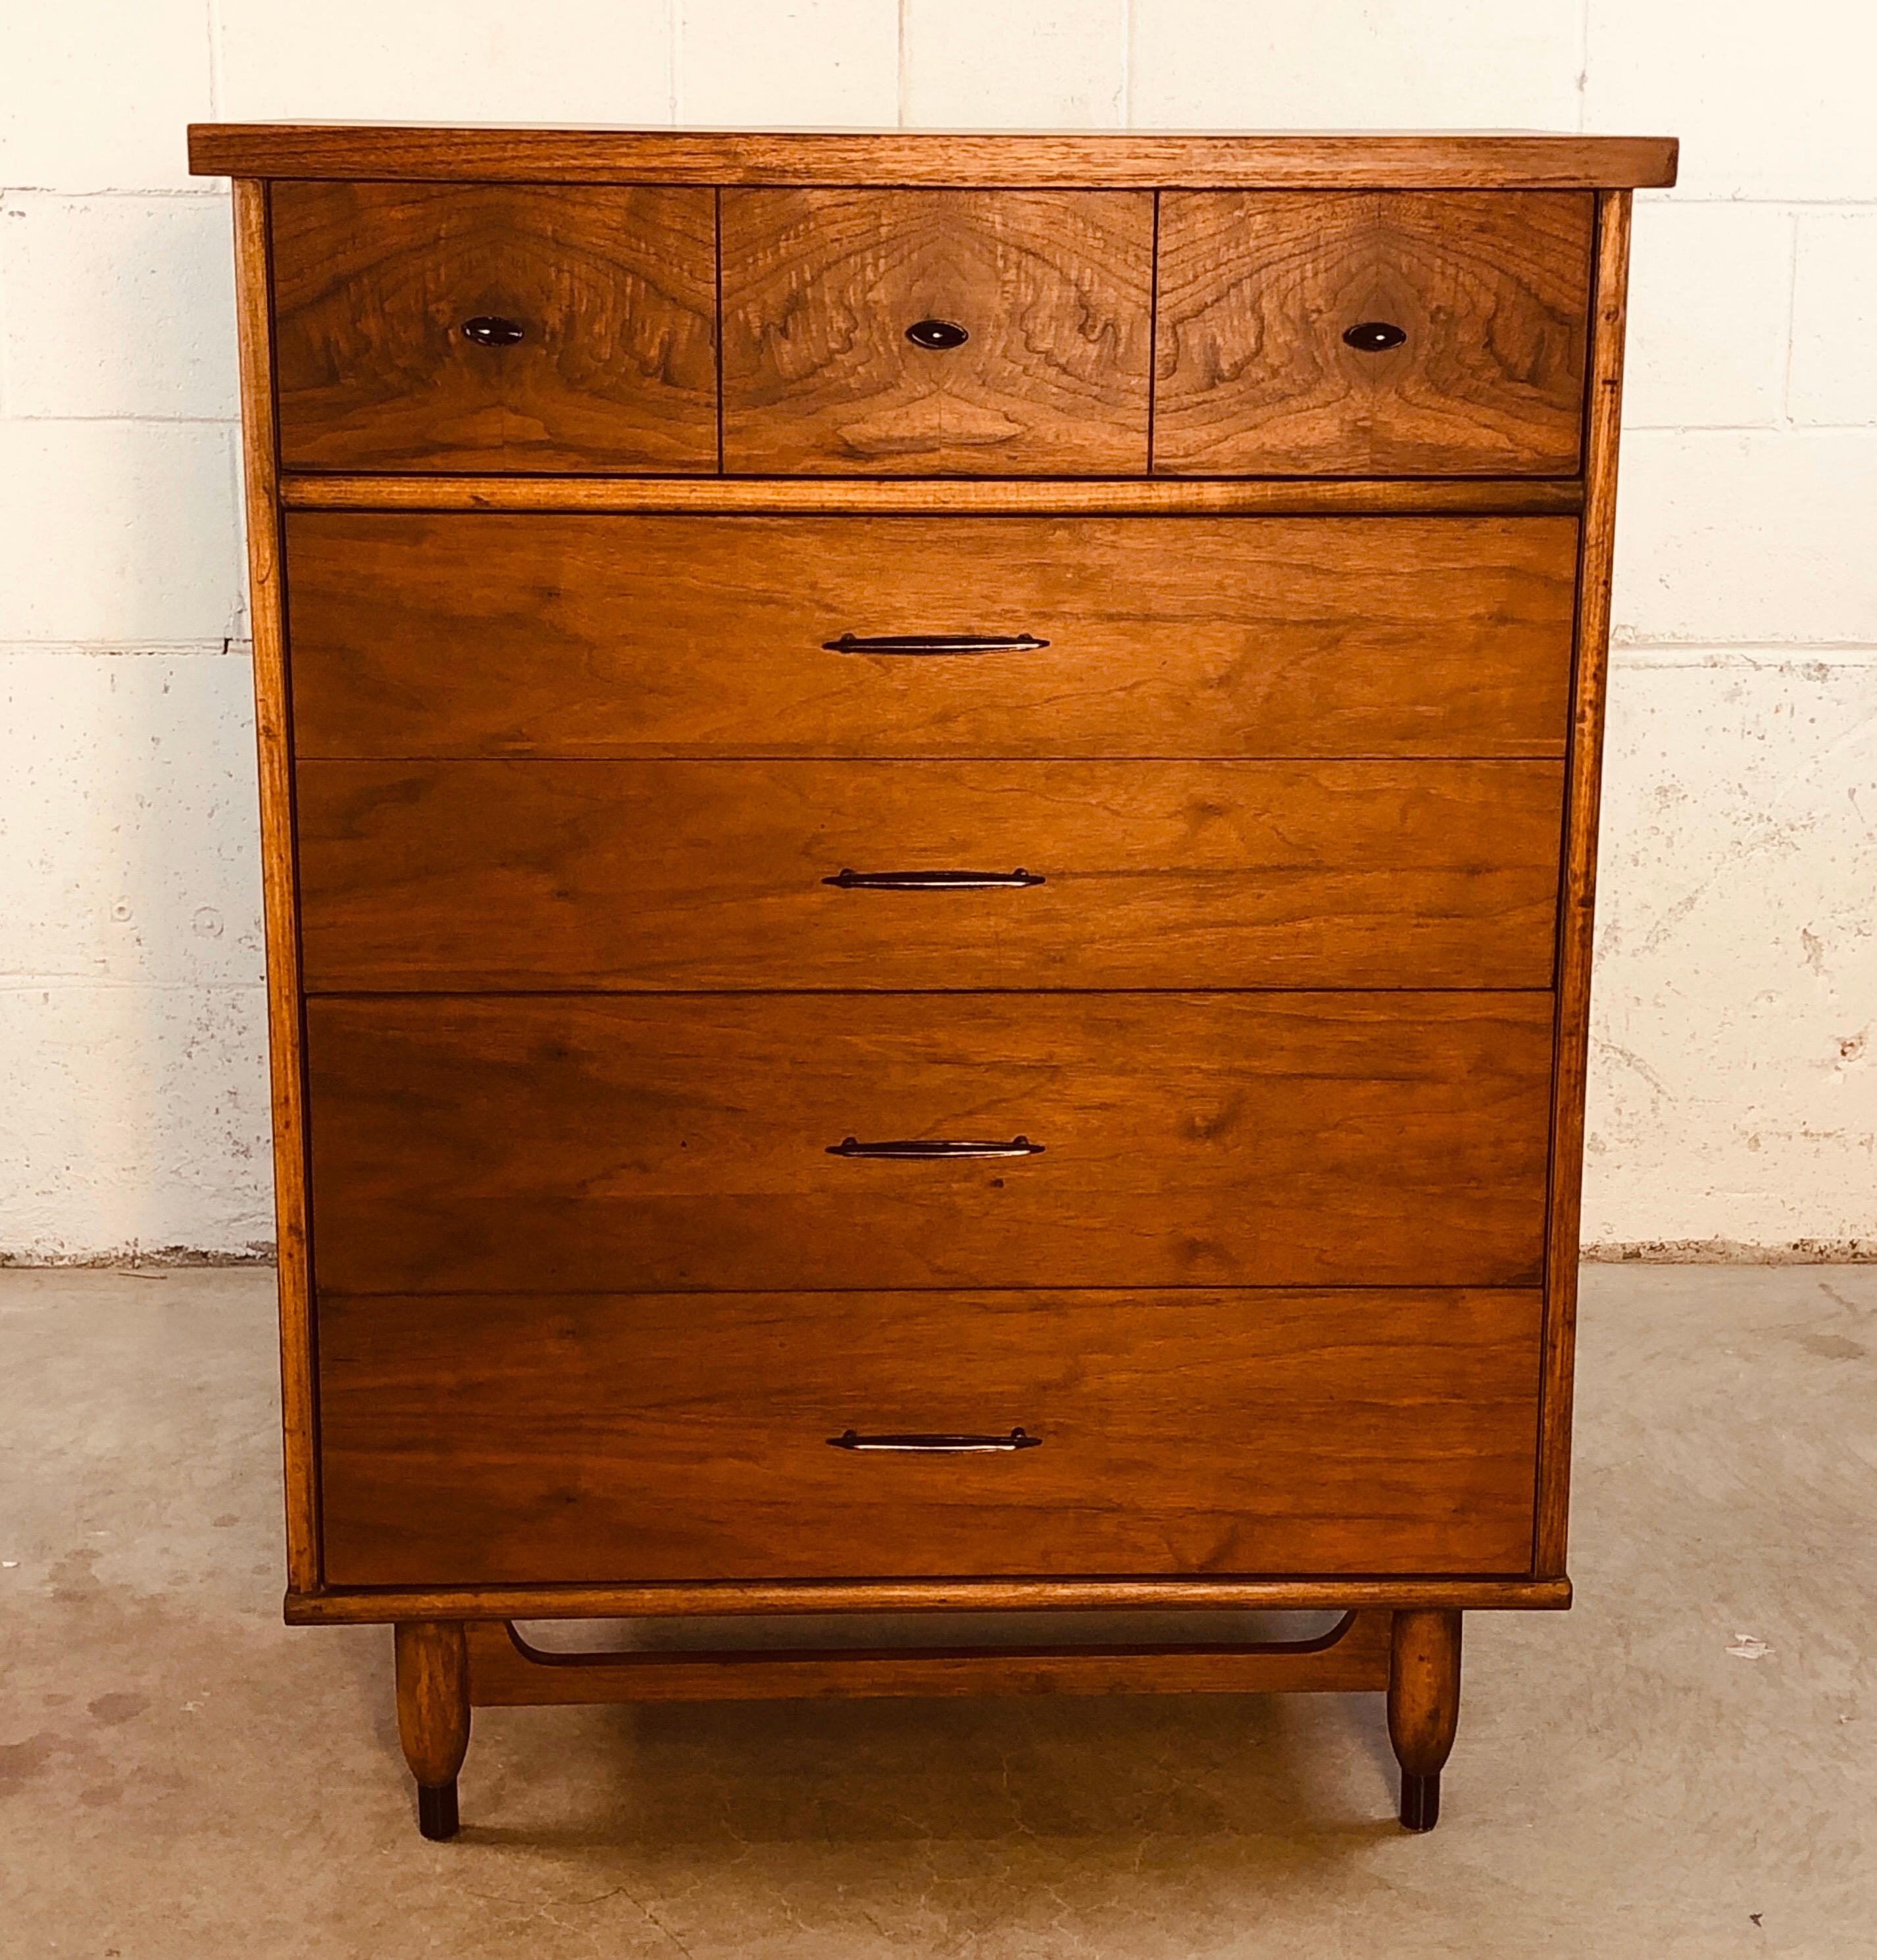 Vintage 1960s walnut wood tall dresser with four drawers and black metal pulls. One drawer is double sized for deeper storage. Fully restored and refinished. No makers mark but labeled “Swedish Walnut” on the back.